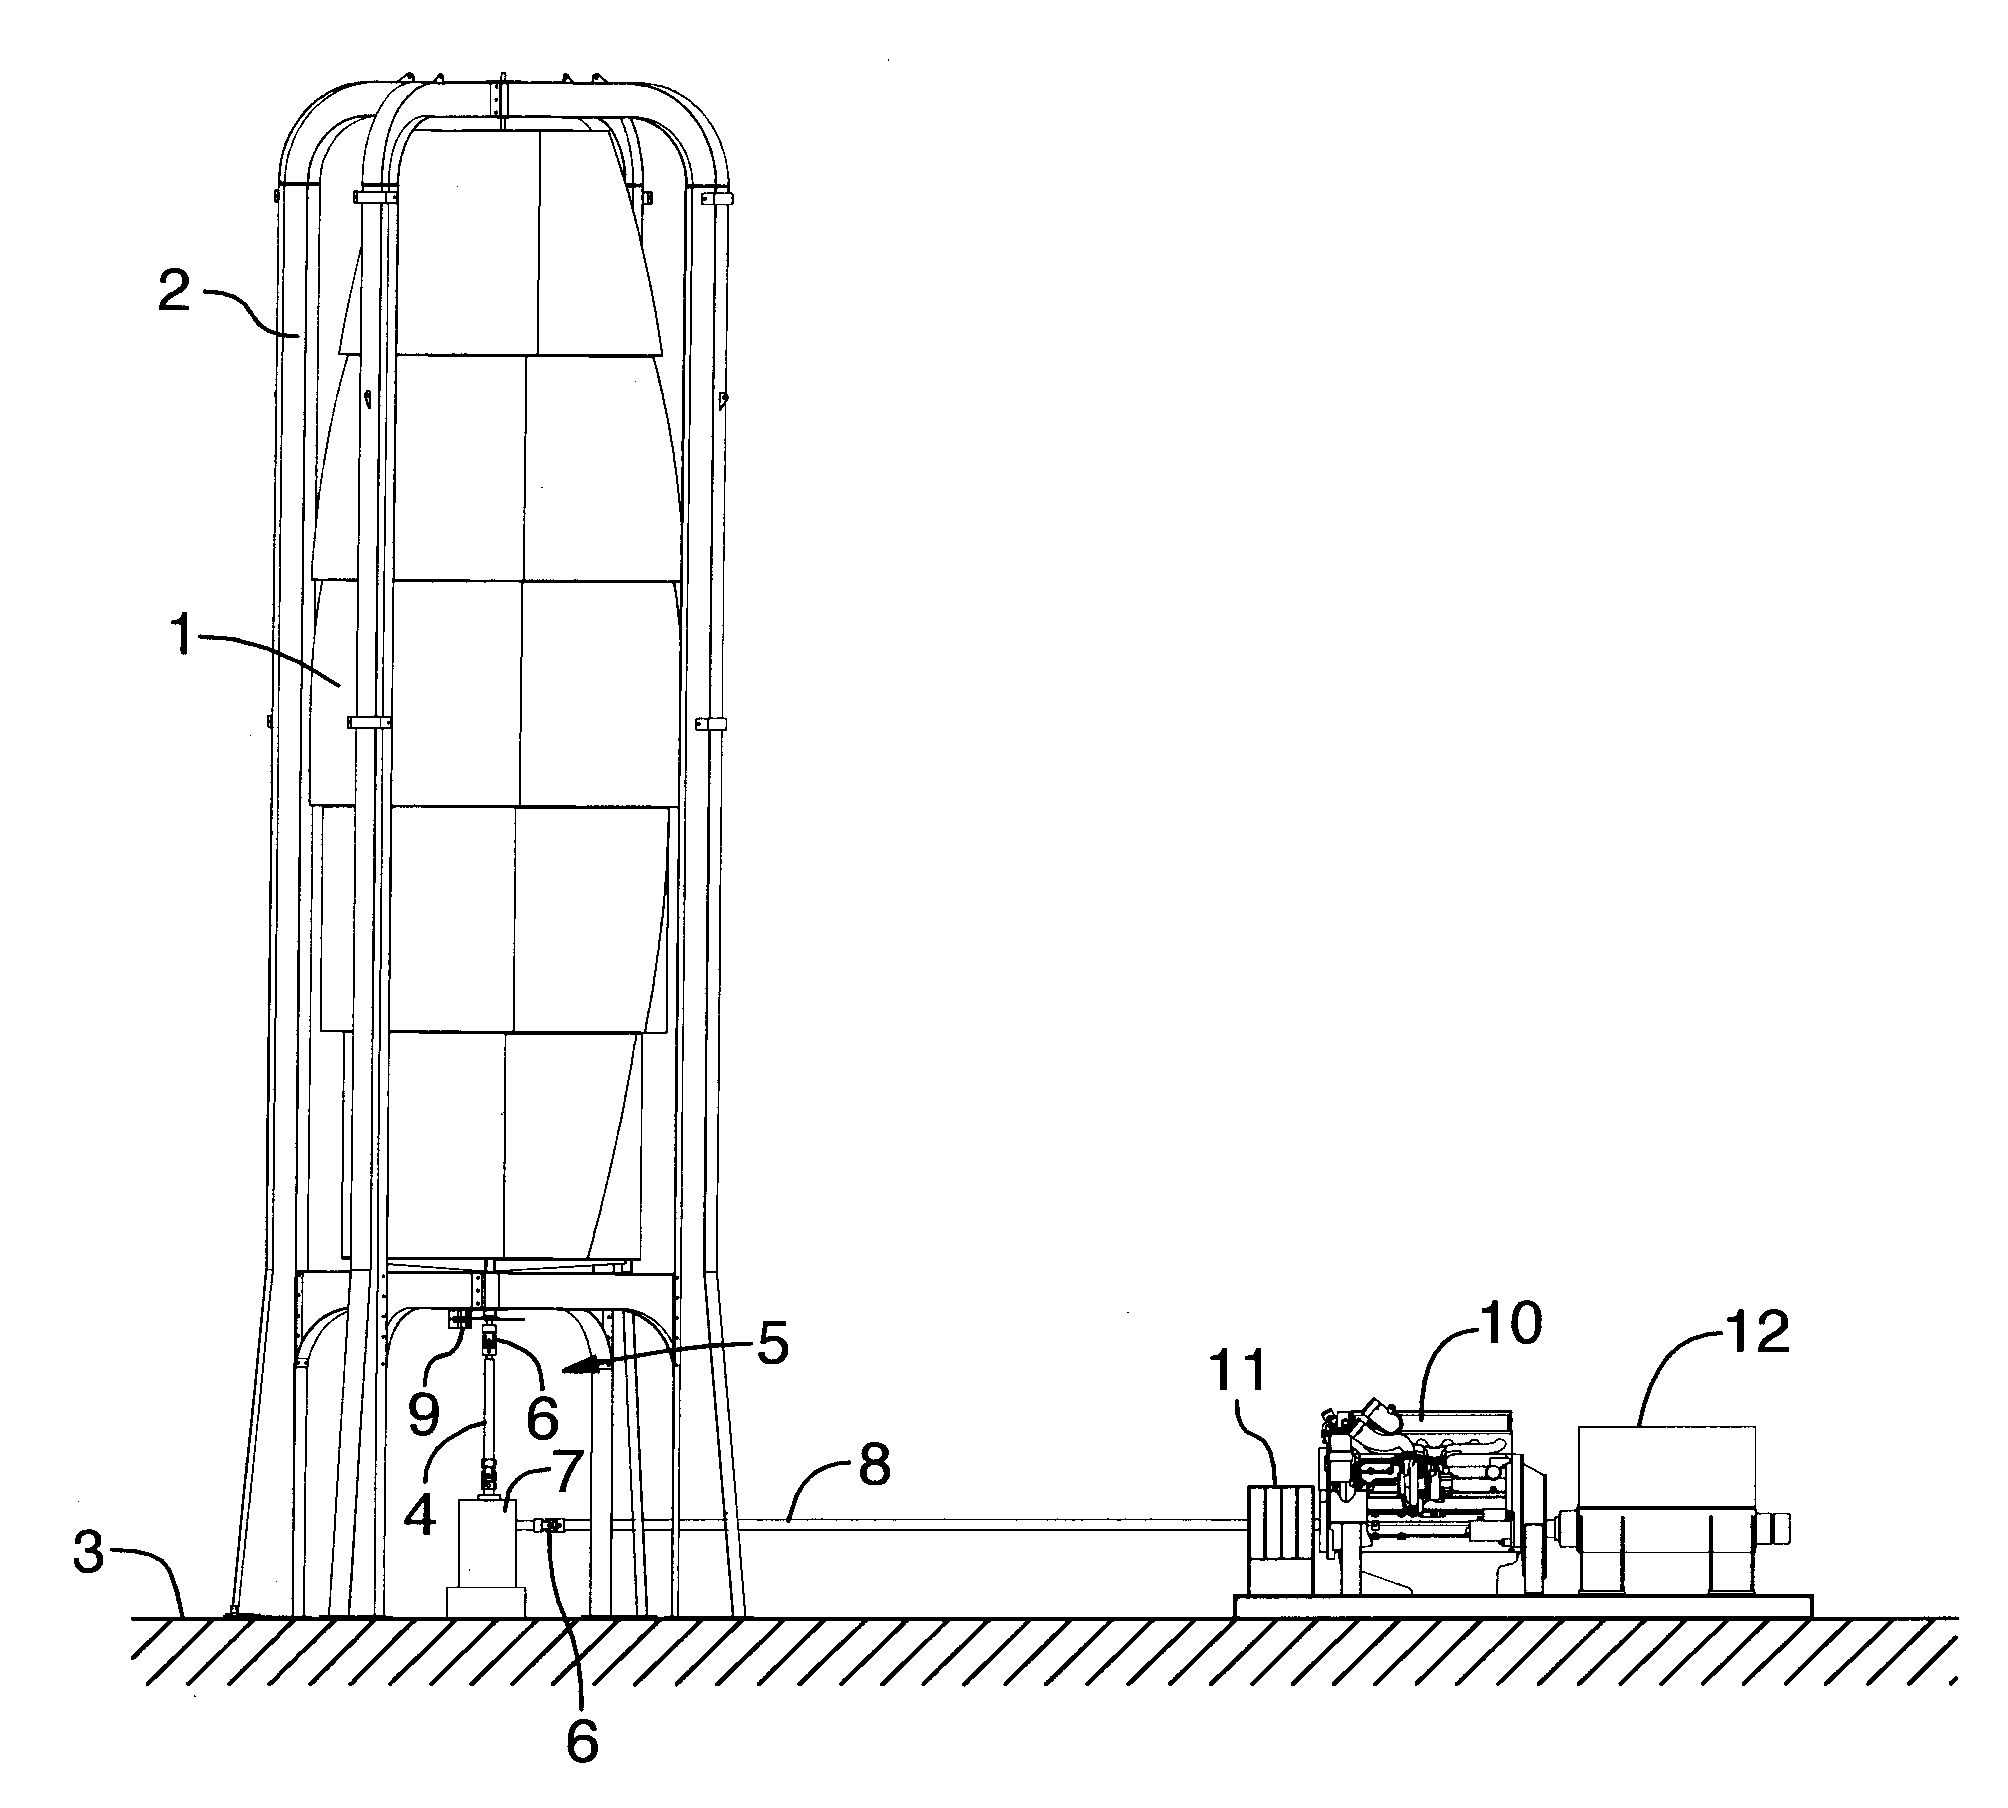 Wind Powered System for Reducing Energy Consumption of a Primary Power Source